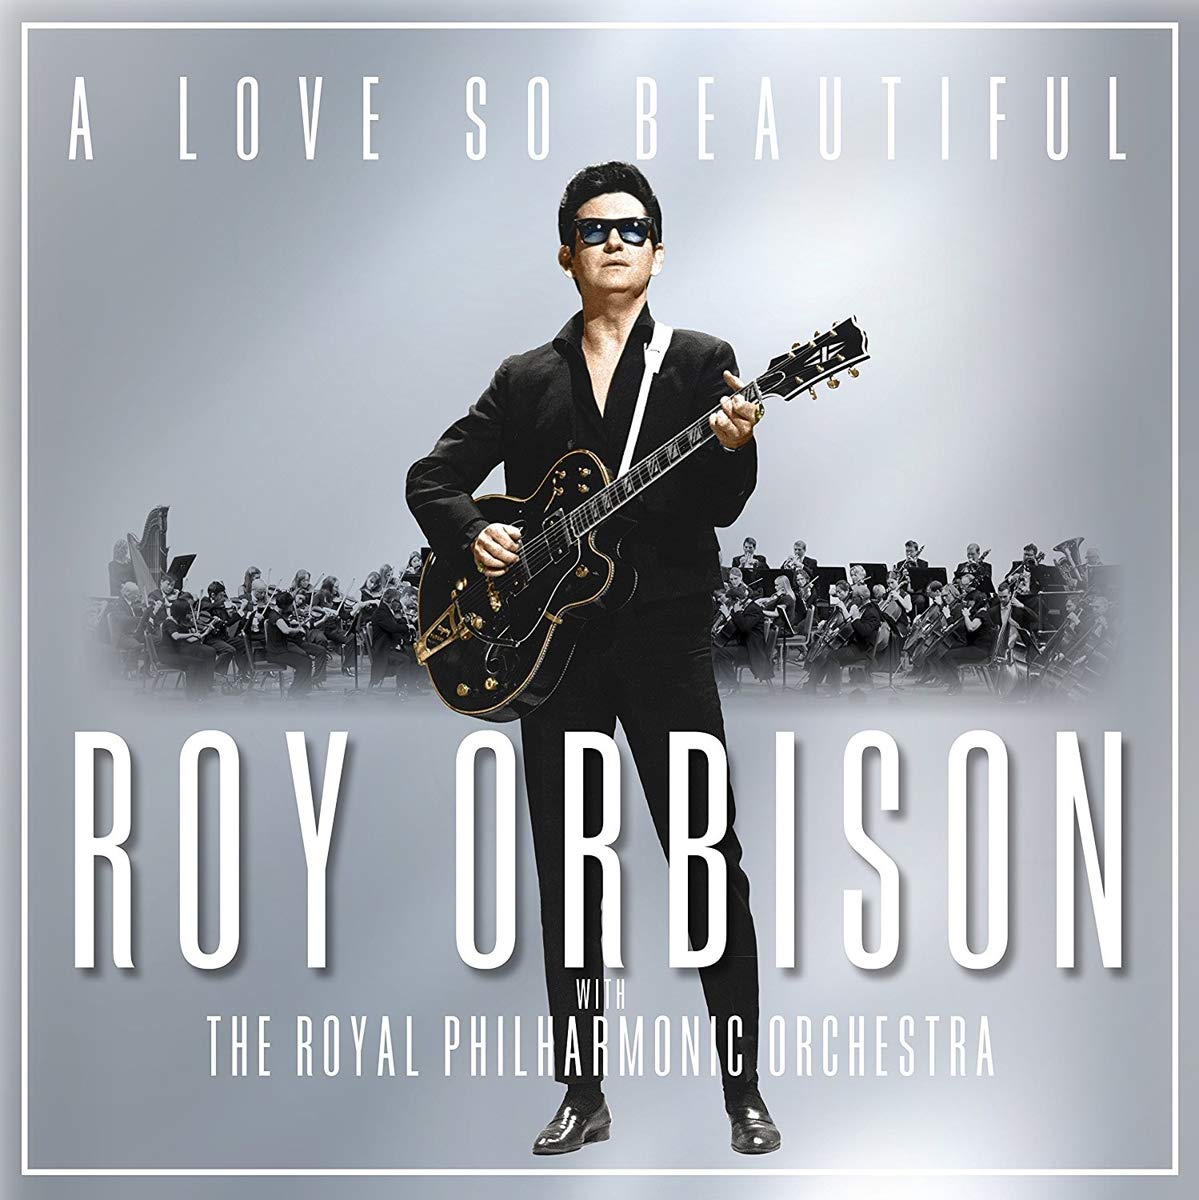 A Love So Beautiful: Roy Orbison with the Royal Philharmonic Orchestra